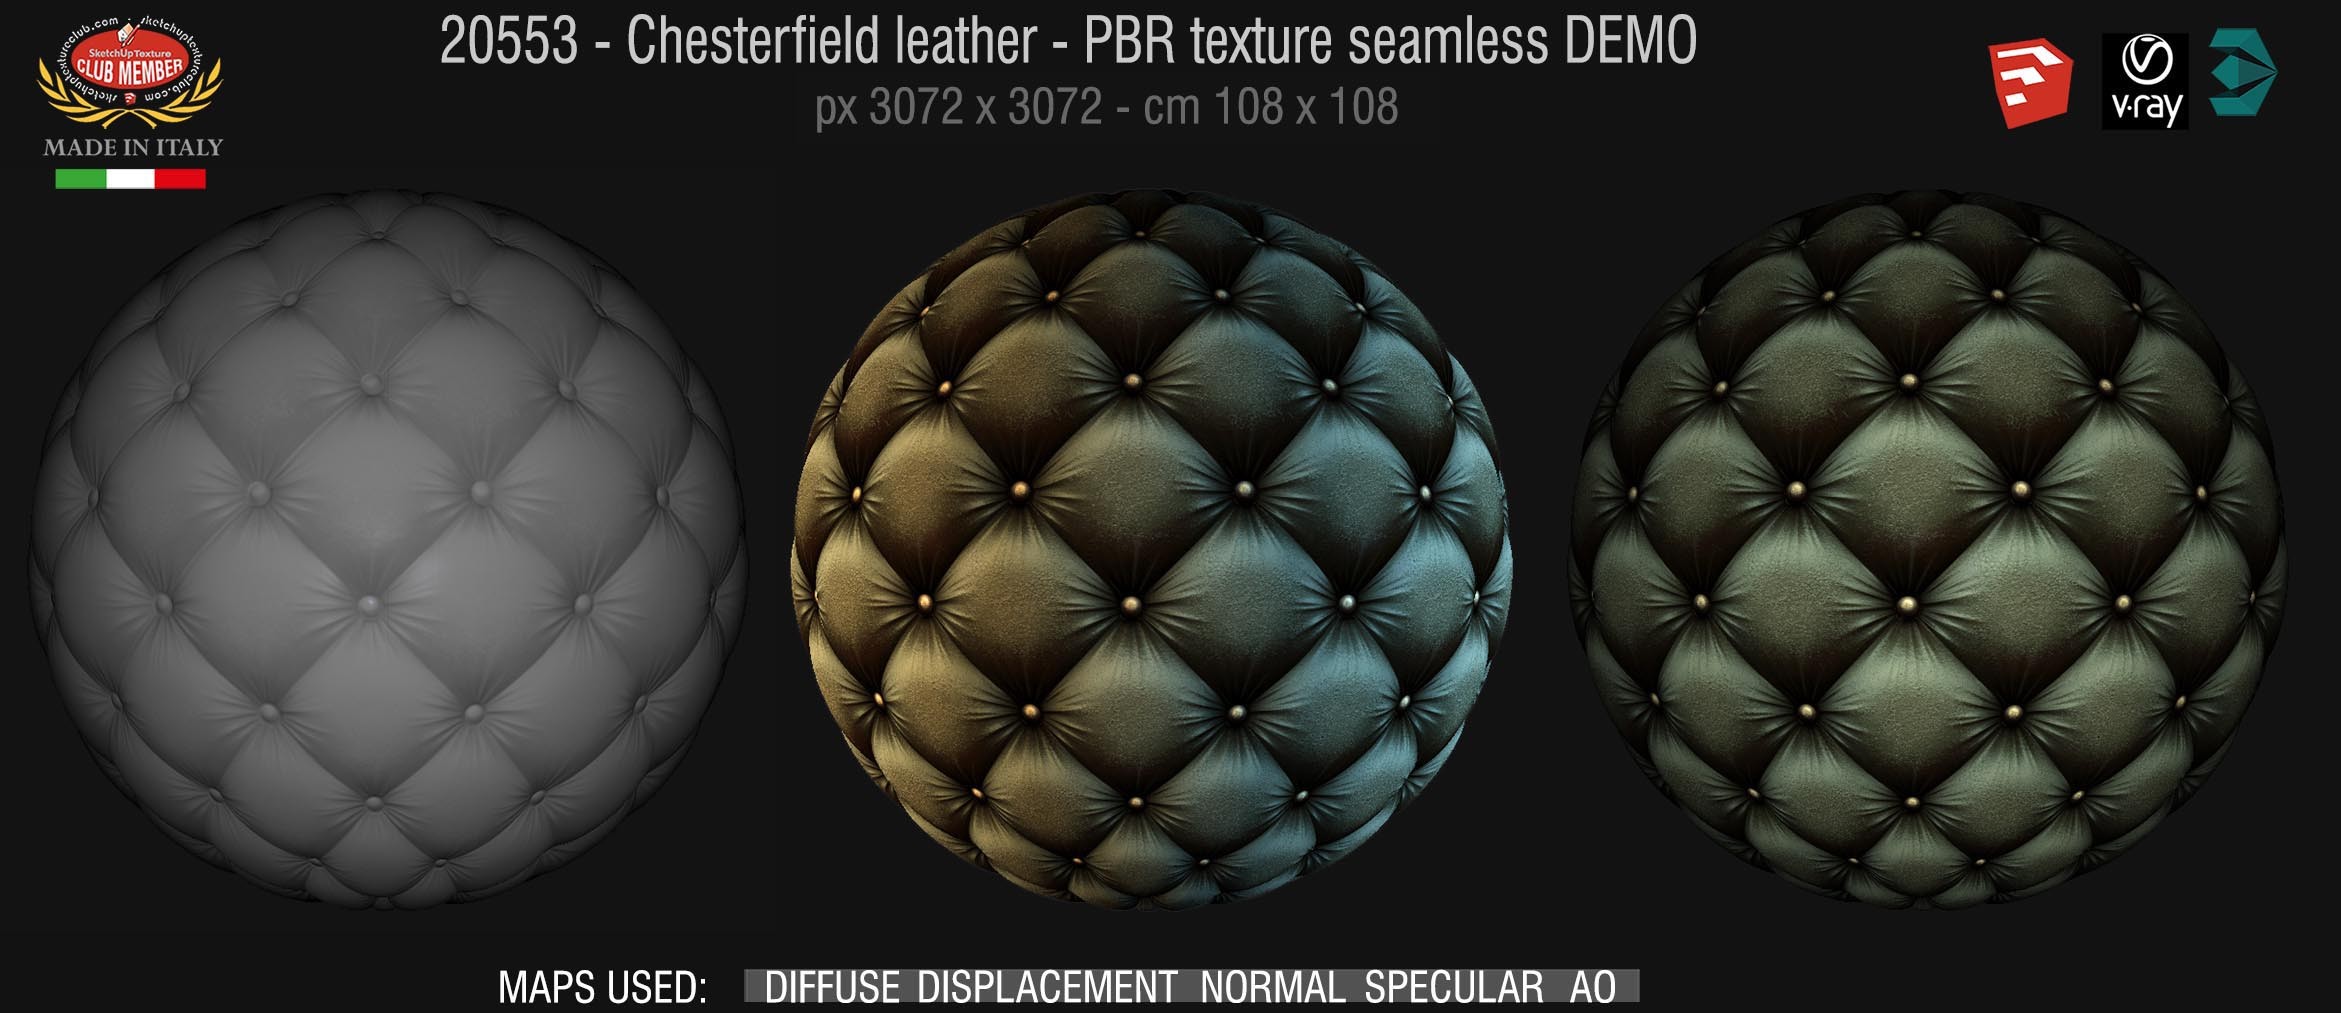 20553 Chesterfield leather PBR texture seamless DEMO